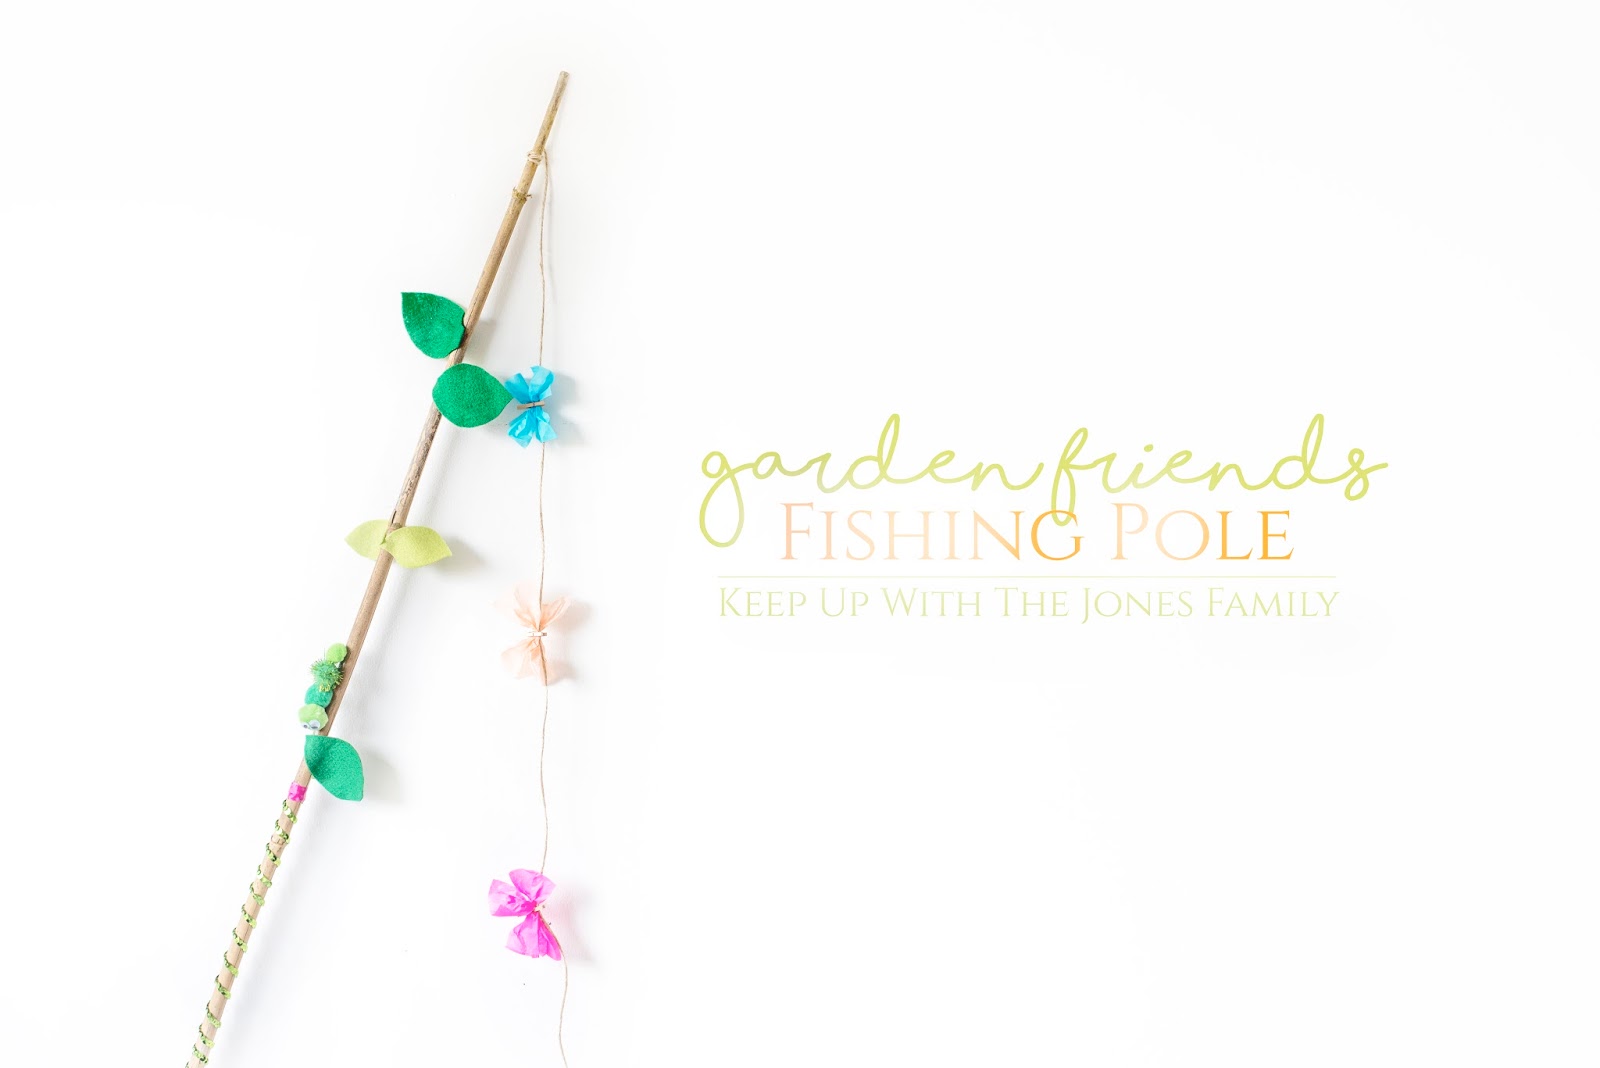 GARDEN FRIENDS FISHING POLE: A CHILD FRIENDLY PHOTOGRAPHY PROP